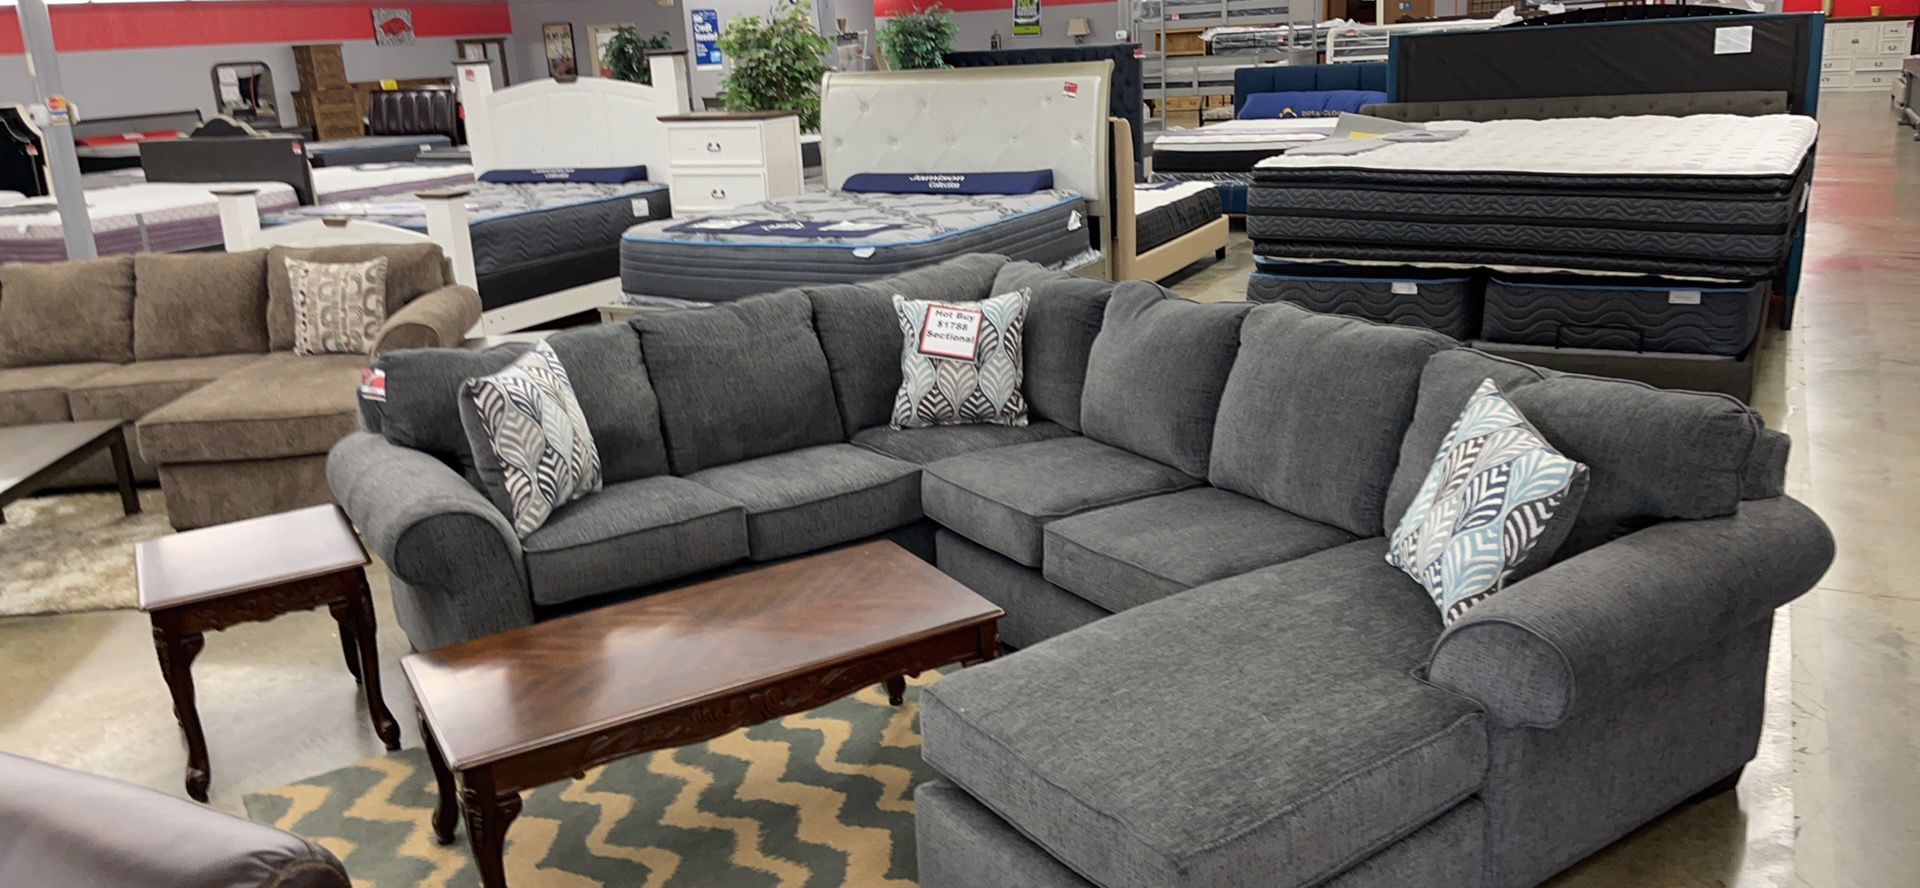 Stationary Sectional On Sale Now!!! Limited Supply Hurry In Today!! 